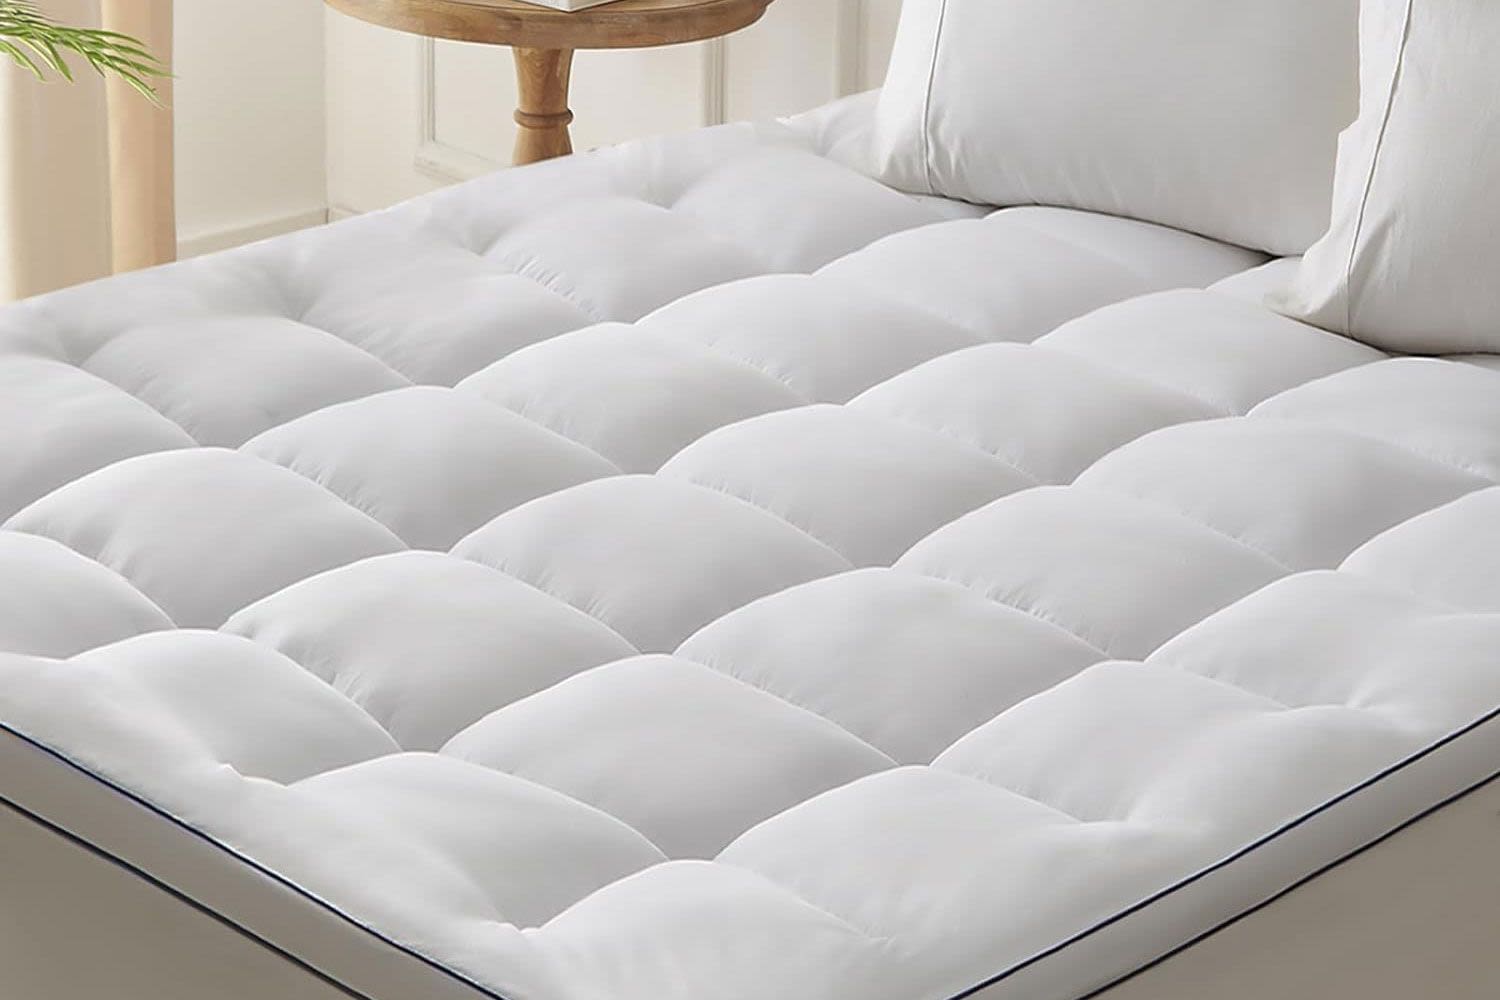 The Best Amazon Deals for Hot Sleepers: Cooling Mattresses, Sheets, and More — Up to 71% Off